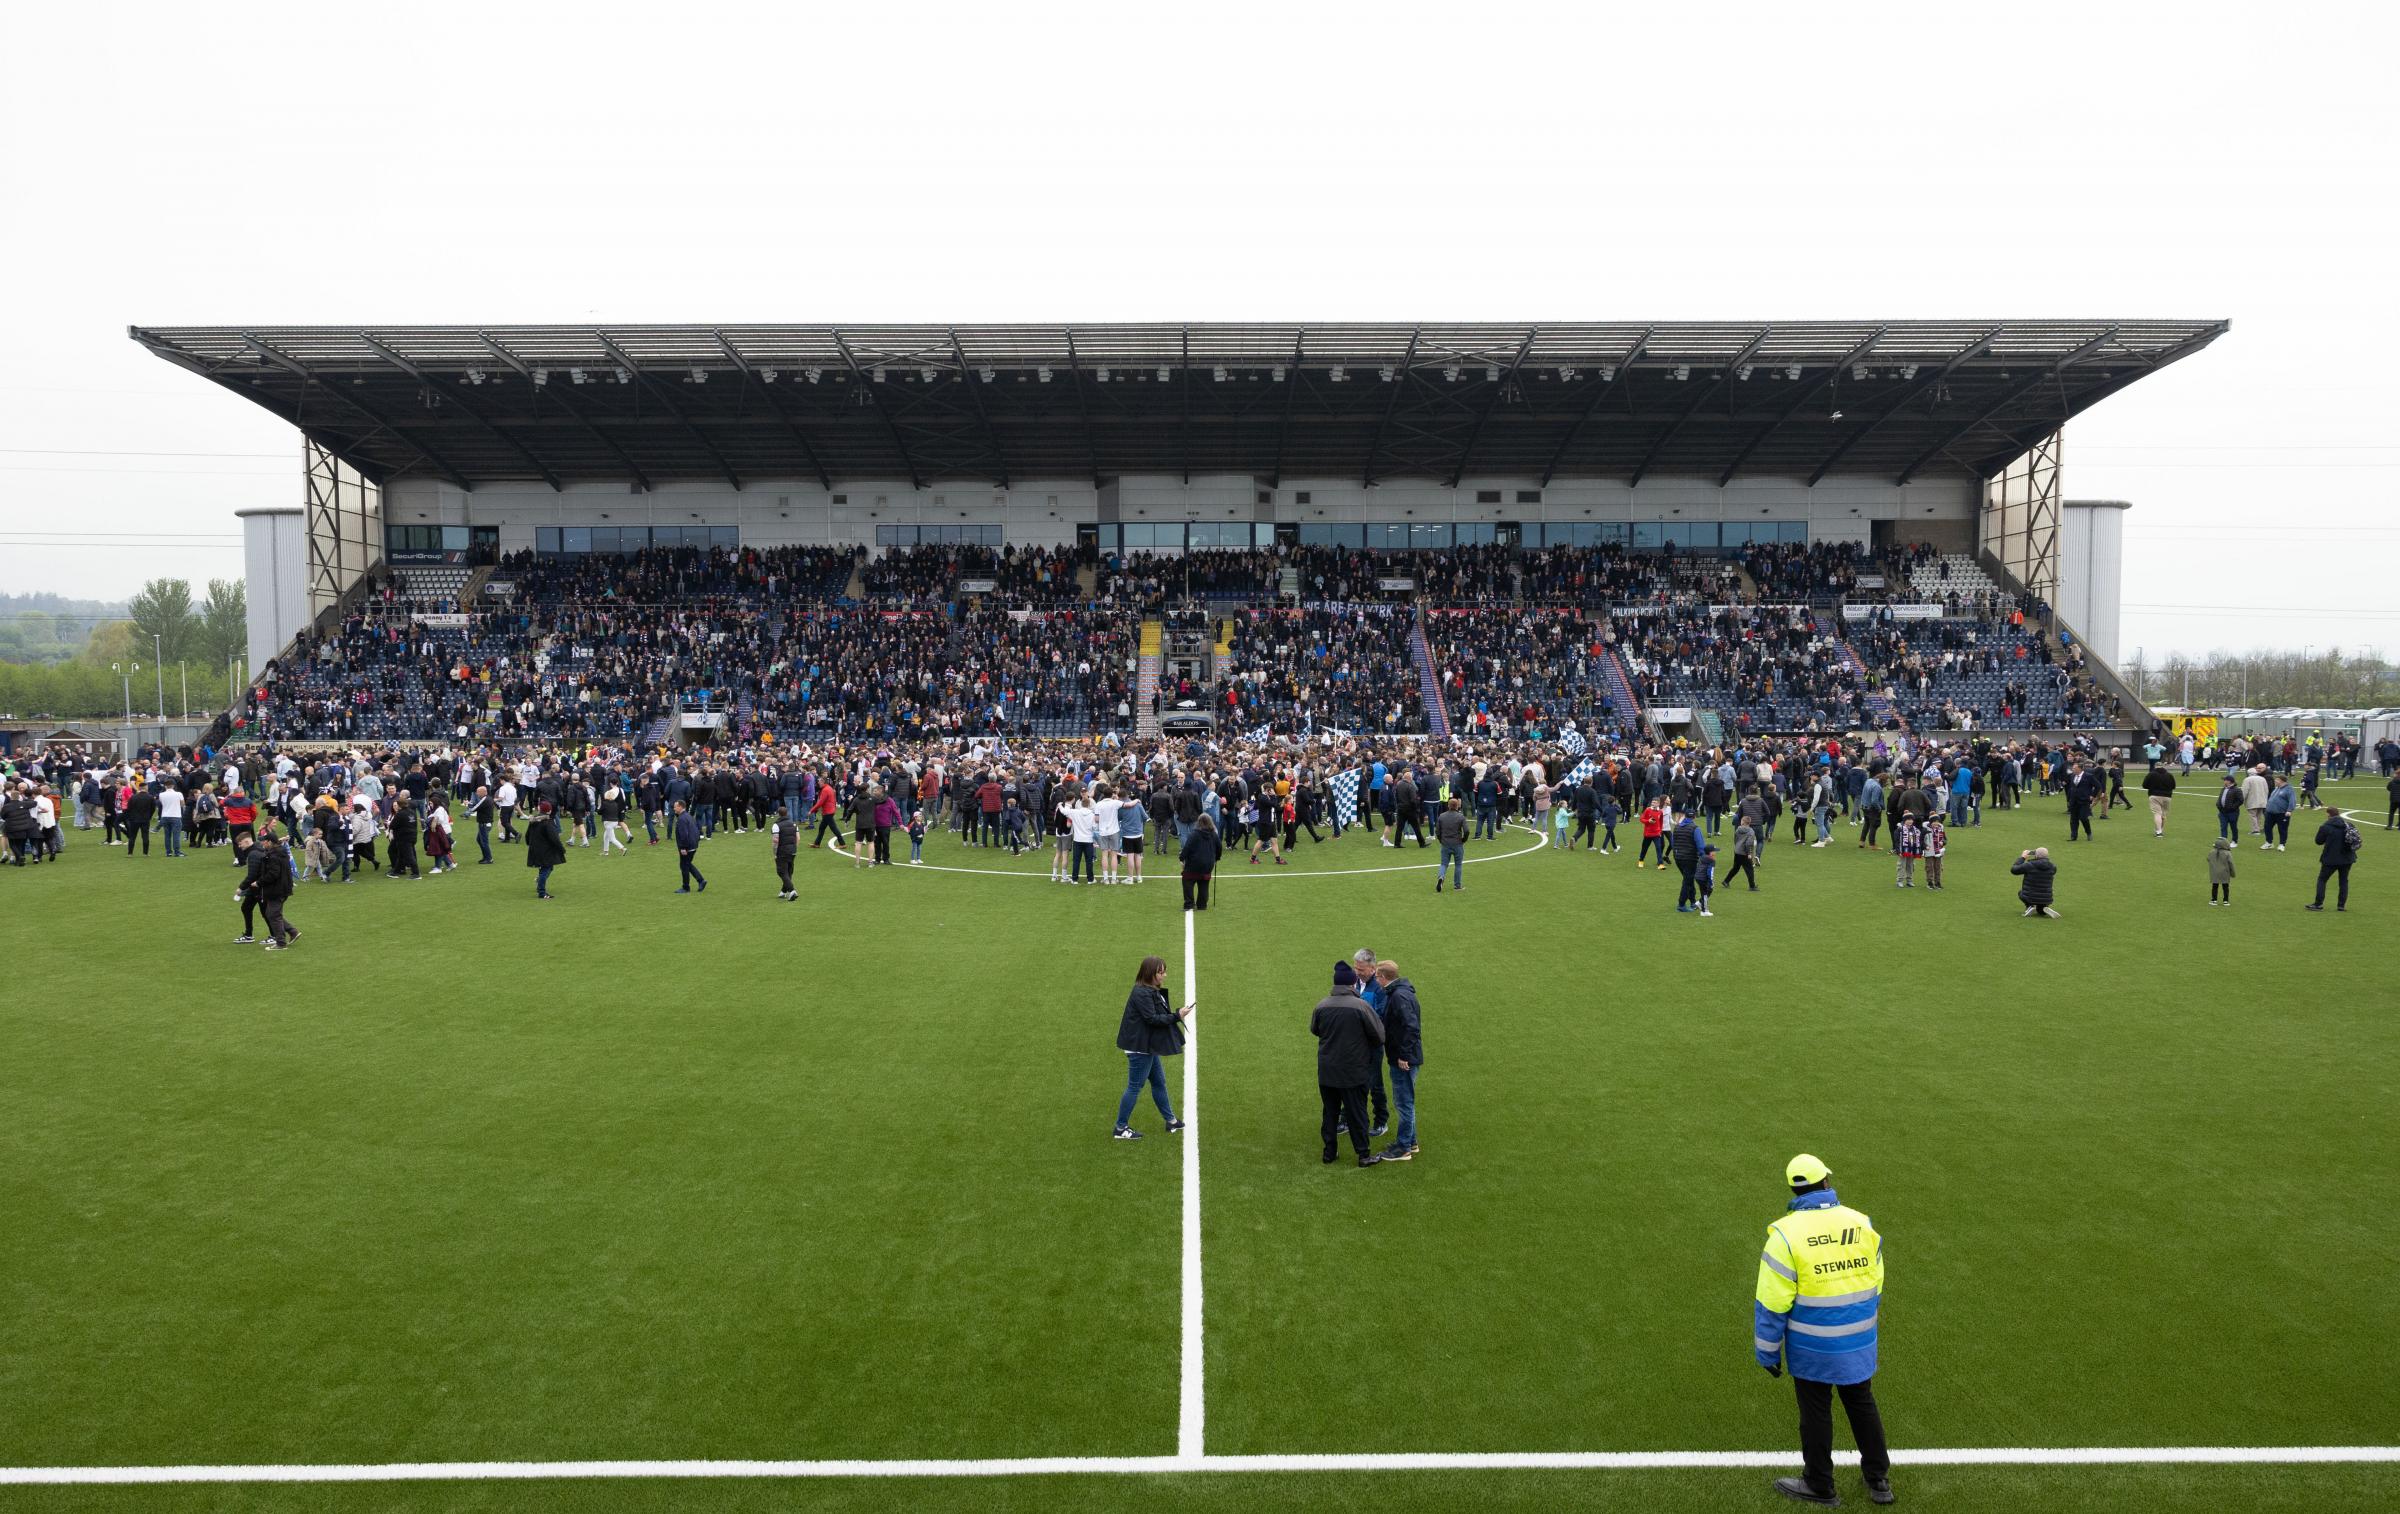 Falkirk & 3 others decree plastic pitch ban as 'fundamentally flawed'